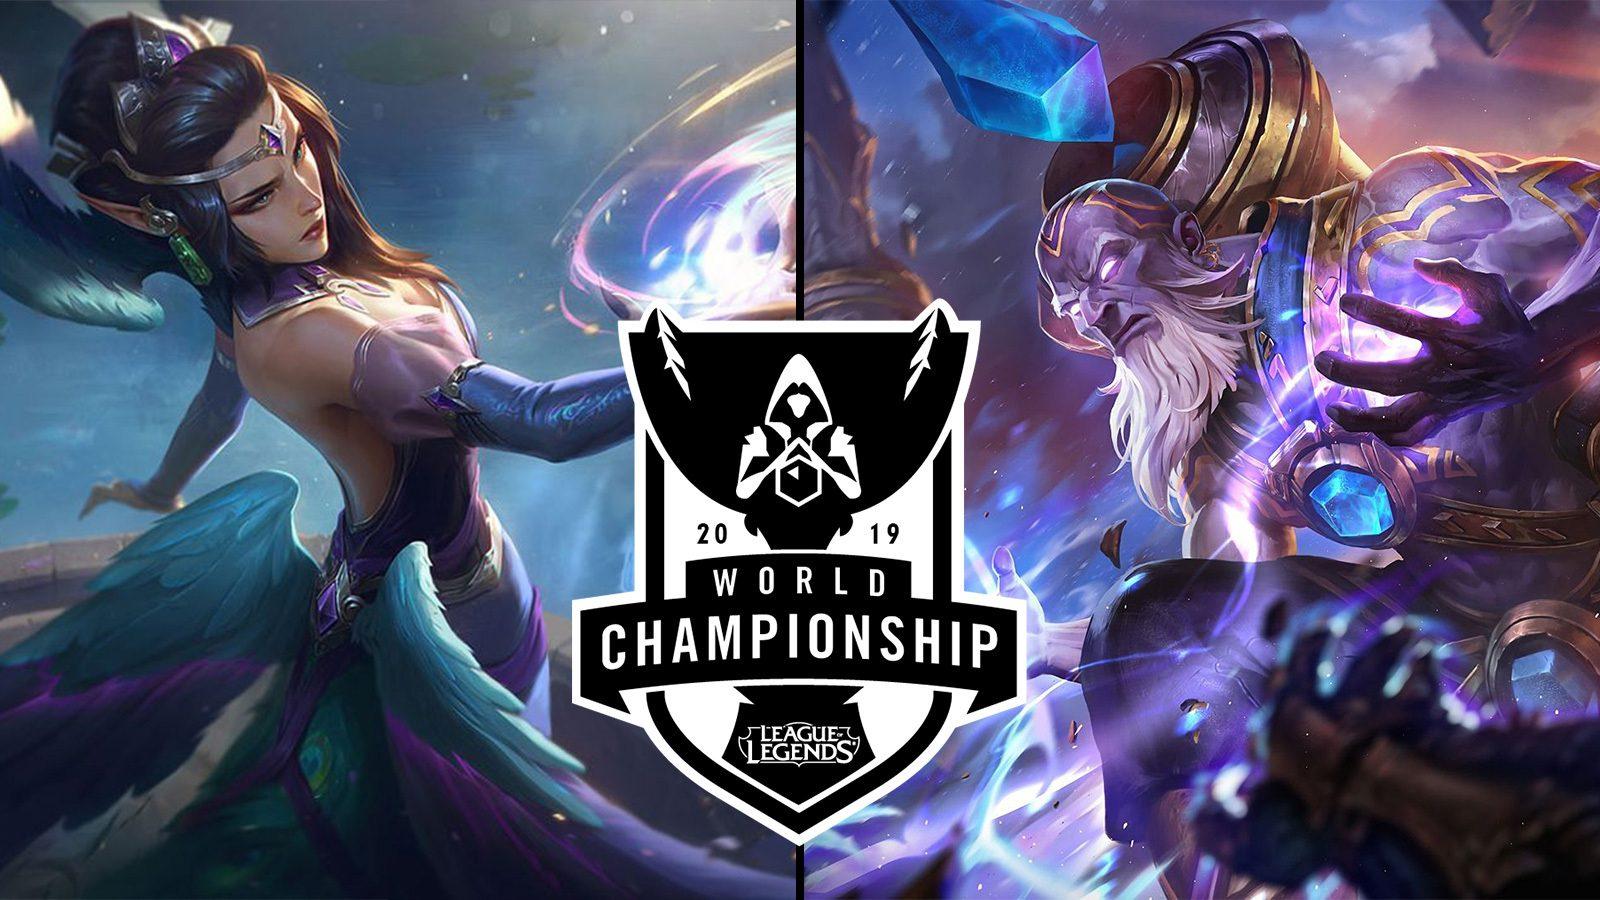 League of Legends World Championship Patch 13.19 - The Game of Nerds